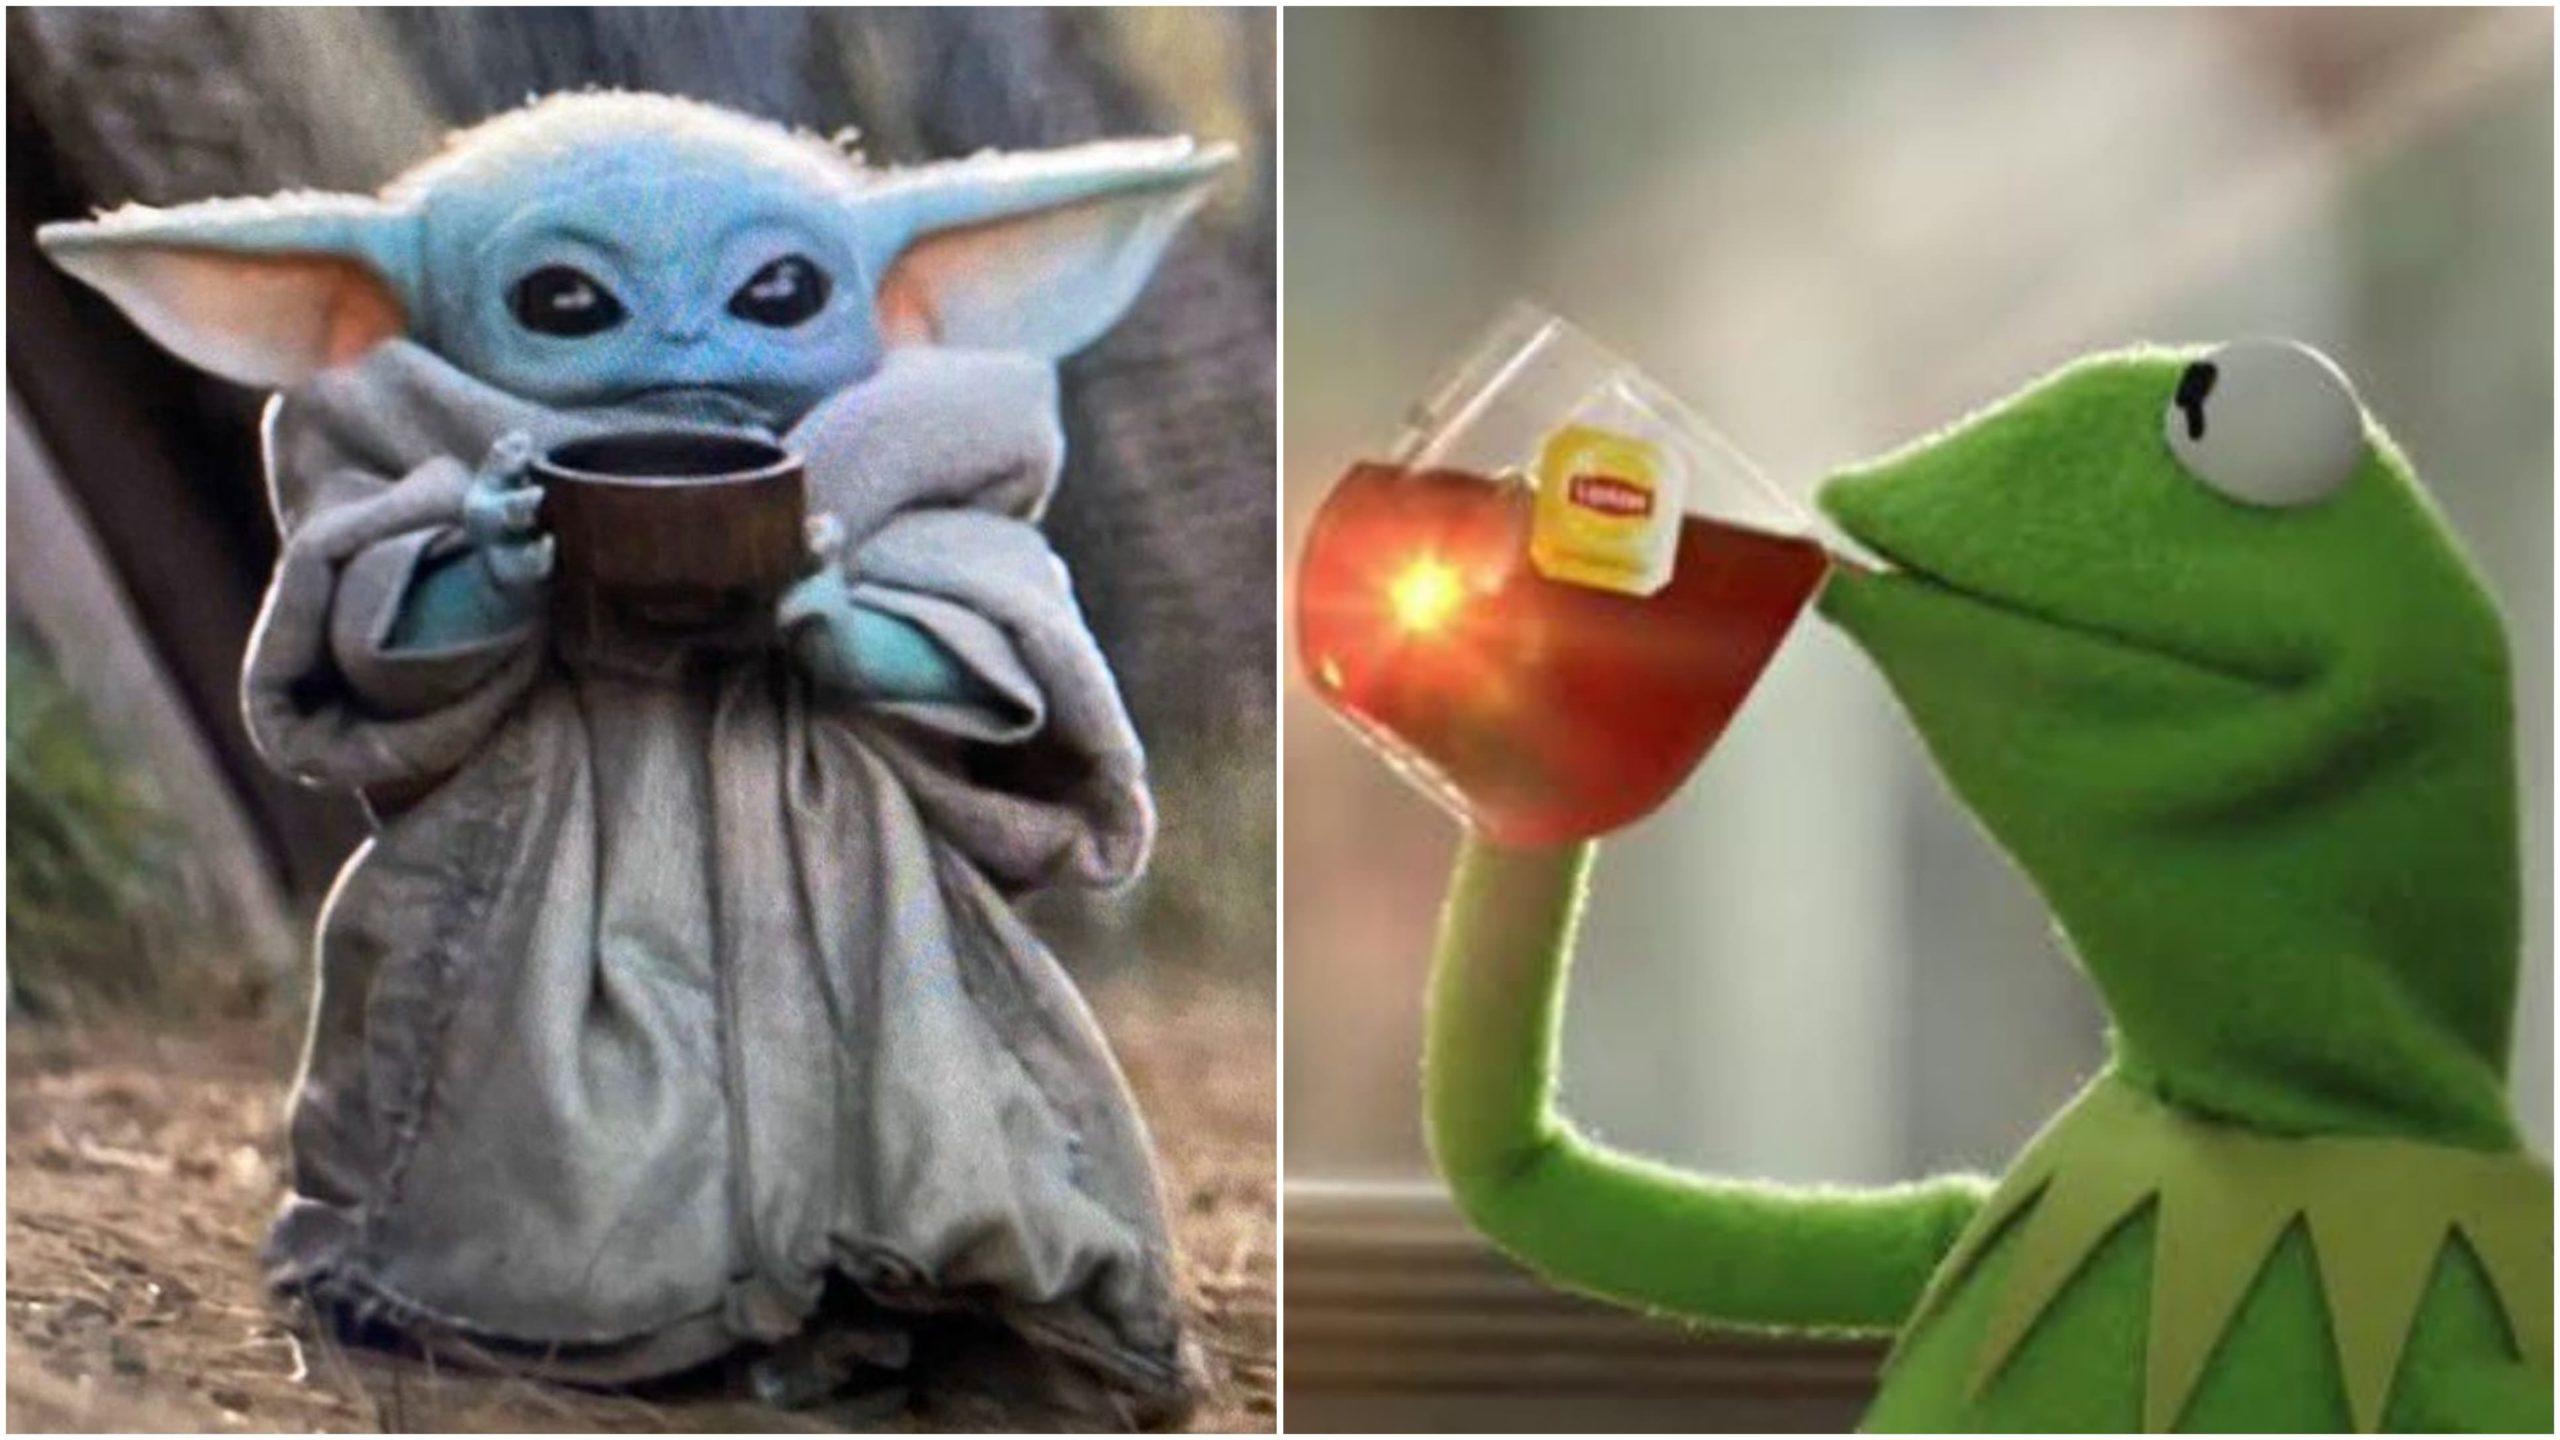 Kermit Sipping Tea Dethroned by Baby Yoda Drinking Soup - Just Disney.